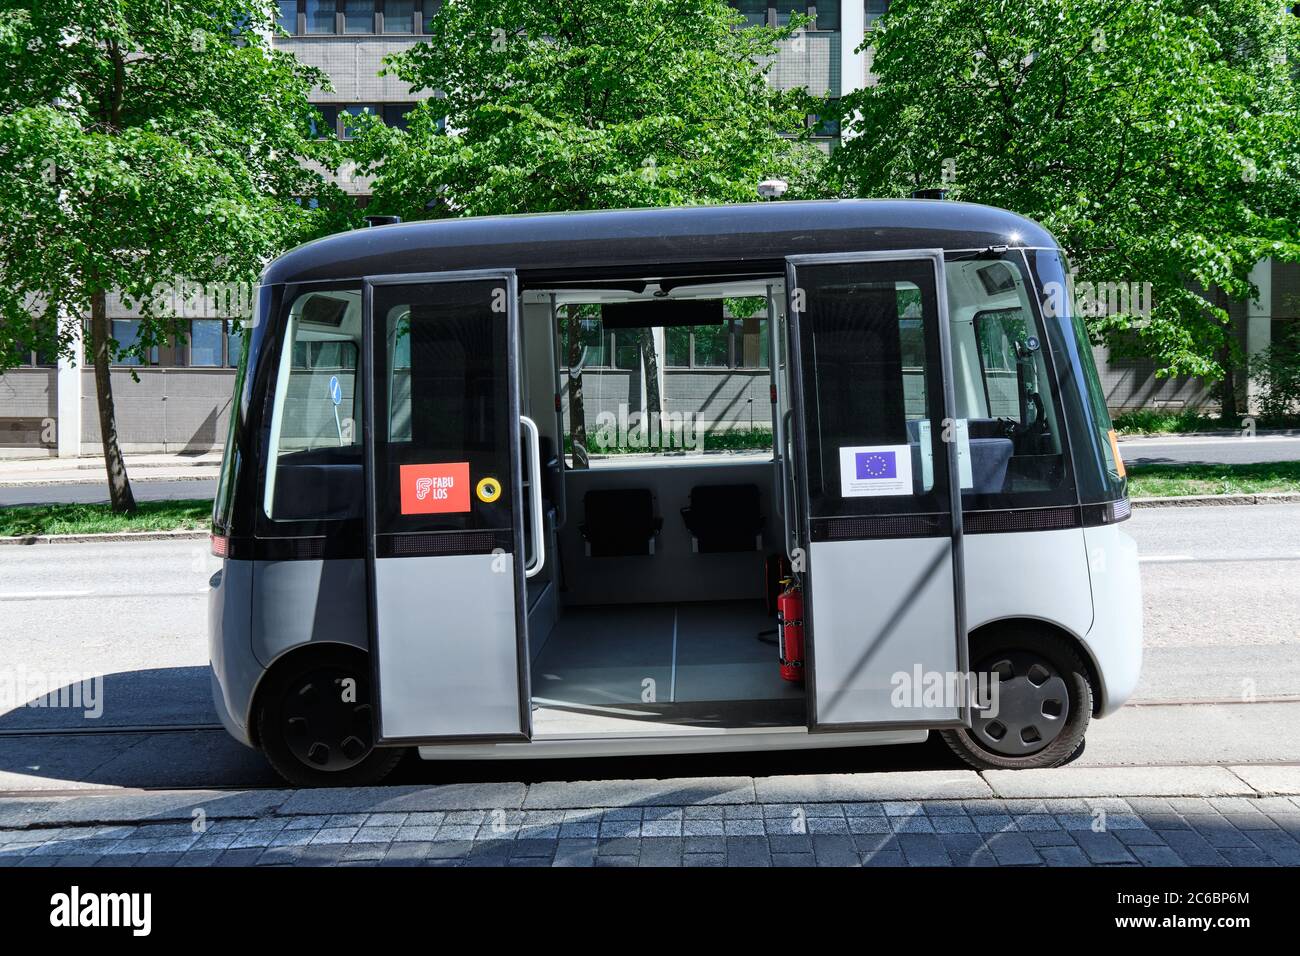 Helsinki, Finland - June 12, 2020: The FABULOS Project - testing self-driving bus in city street in Pasila district. Stock Photo